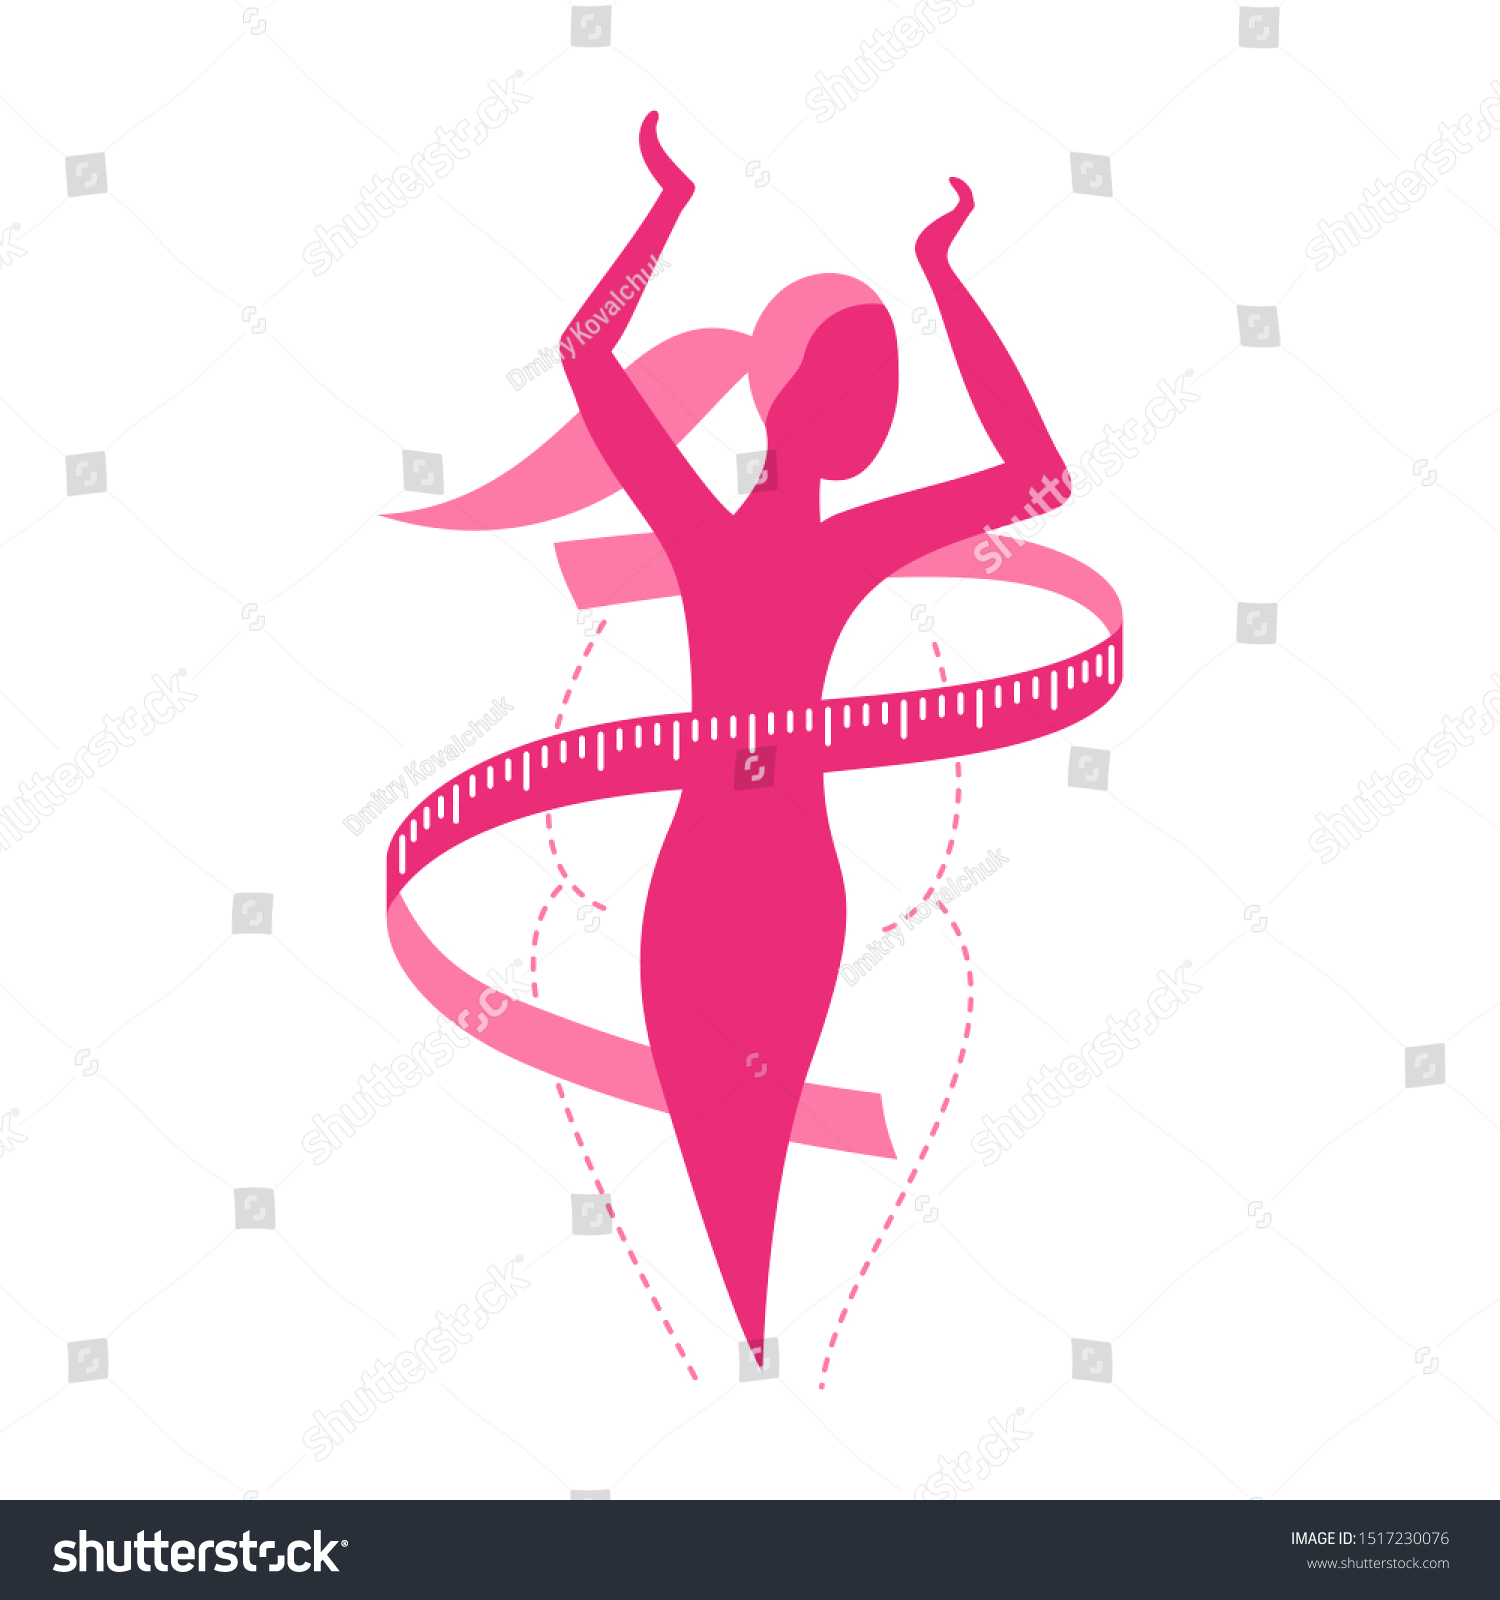 Weight loss challenge diet program logo (isolated icon) - abstract woman silhouette (fat and shapely figure) with measuring tape around  #1517230076